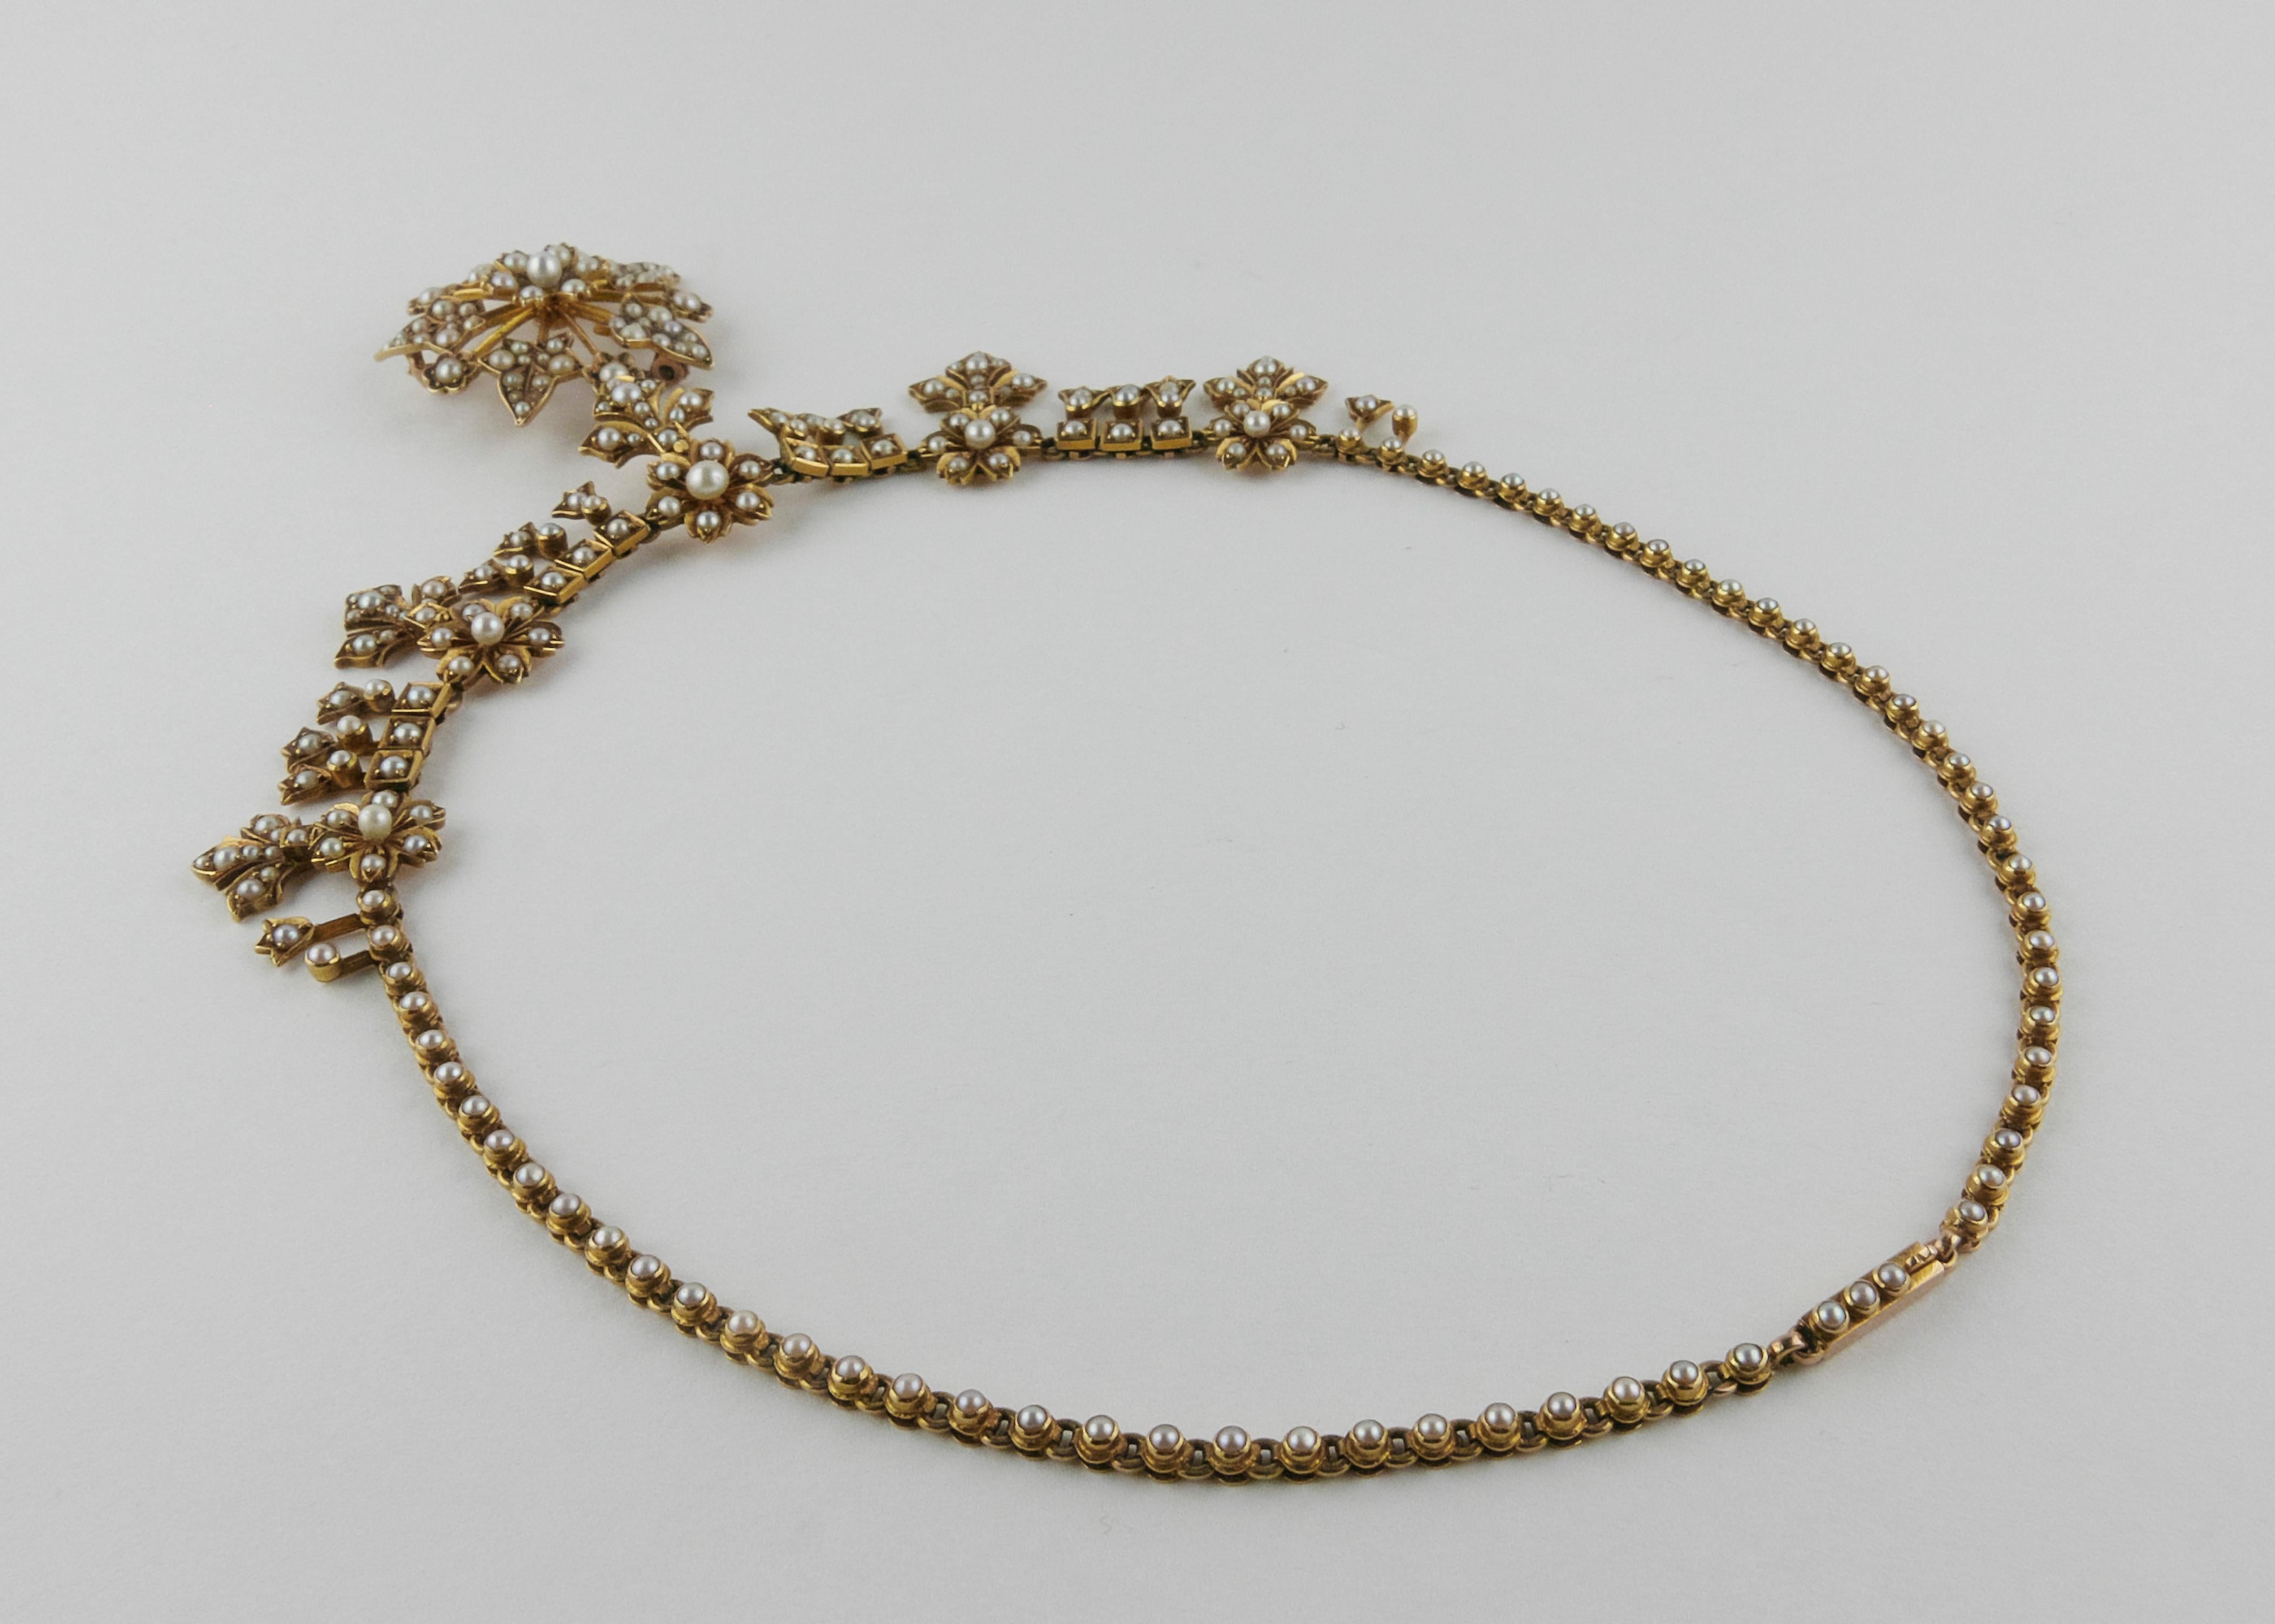 Women's Late 19th Century Gold and Pearls Necklace and Pendant For Sale